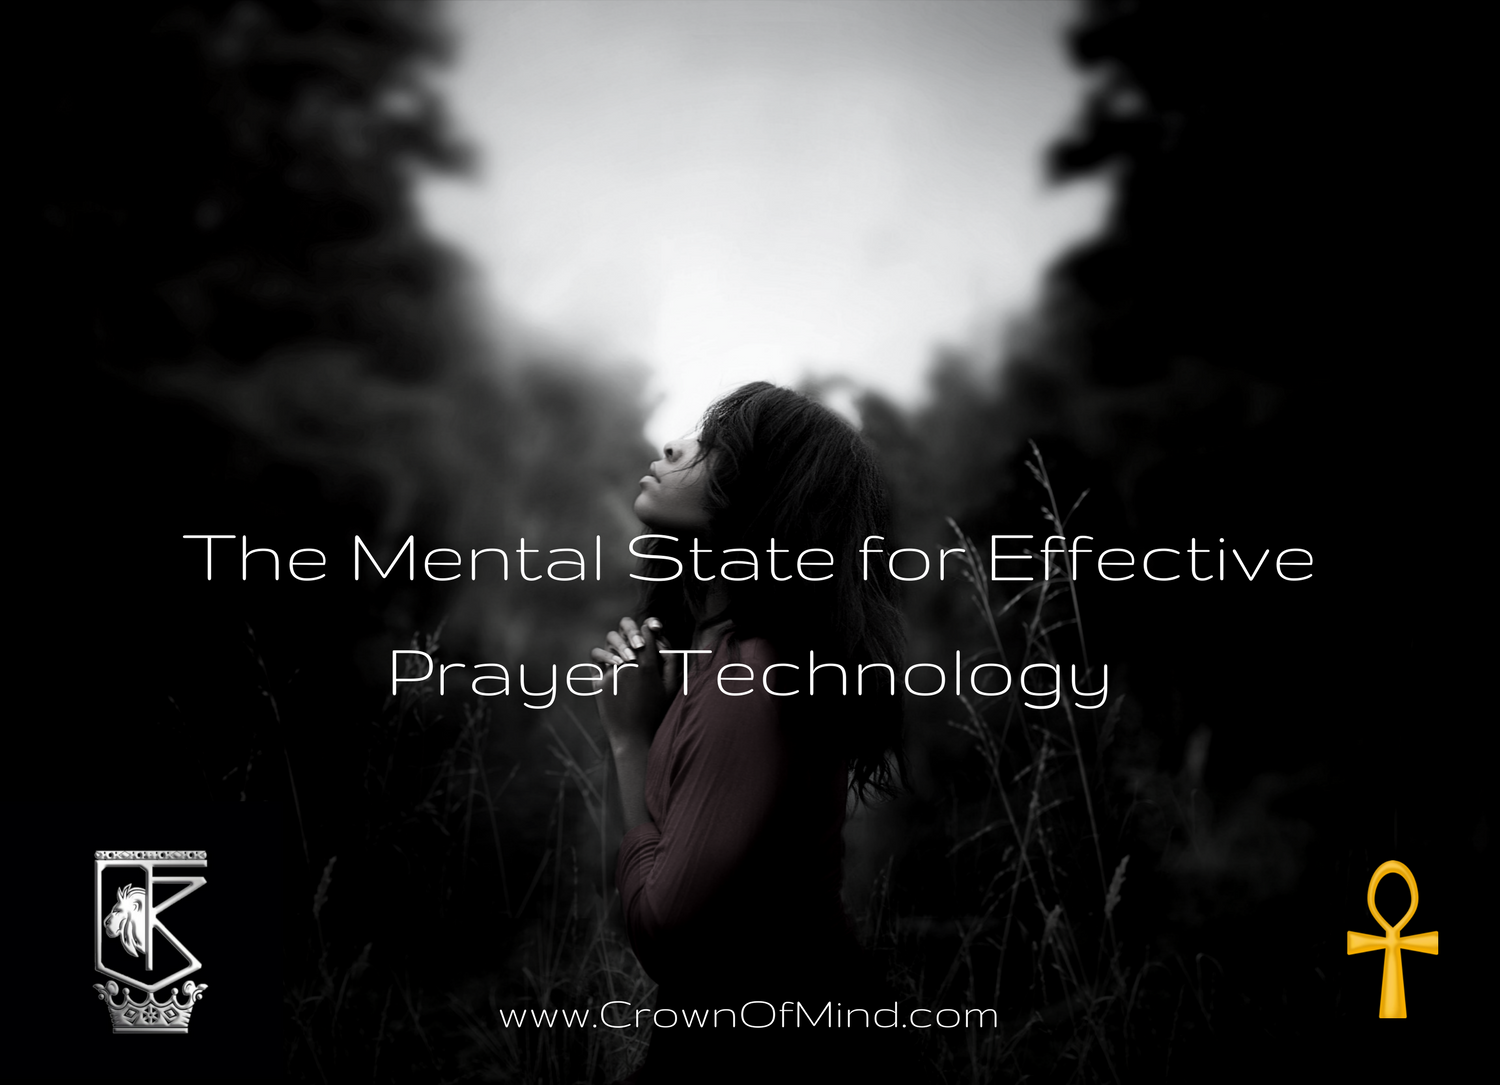 The Mental State for Effective Prayer Technology